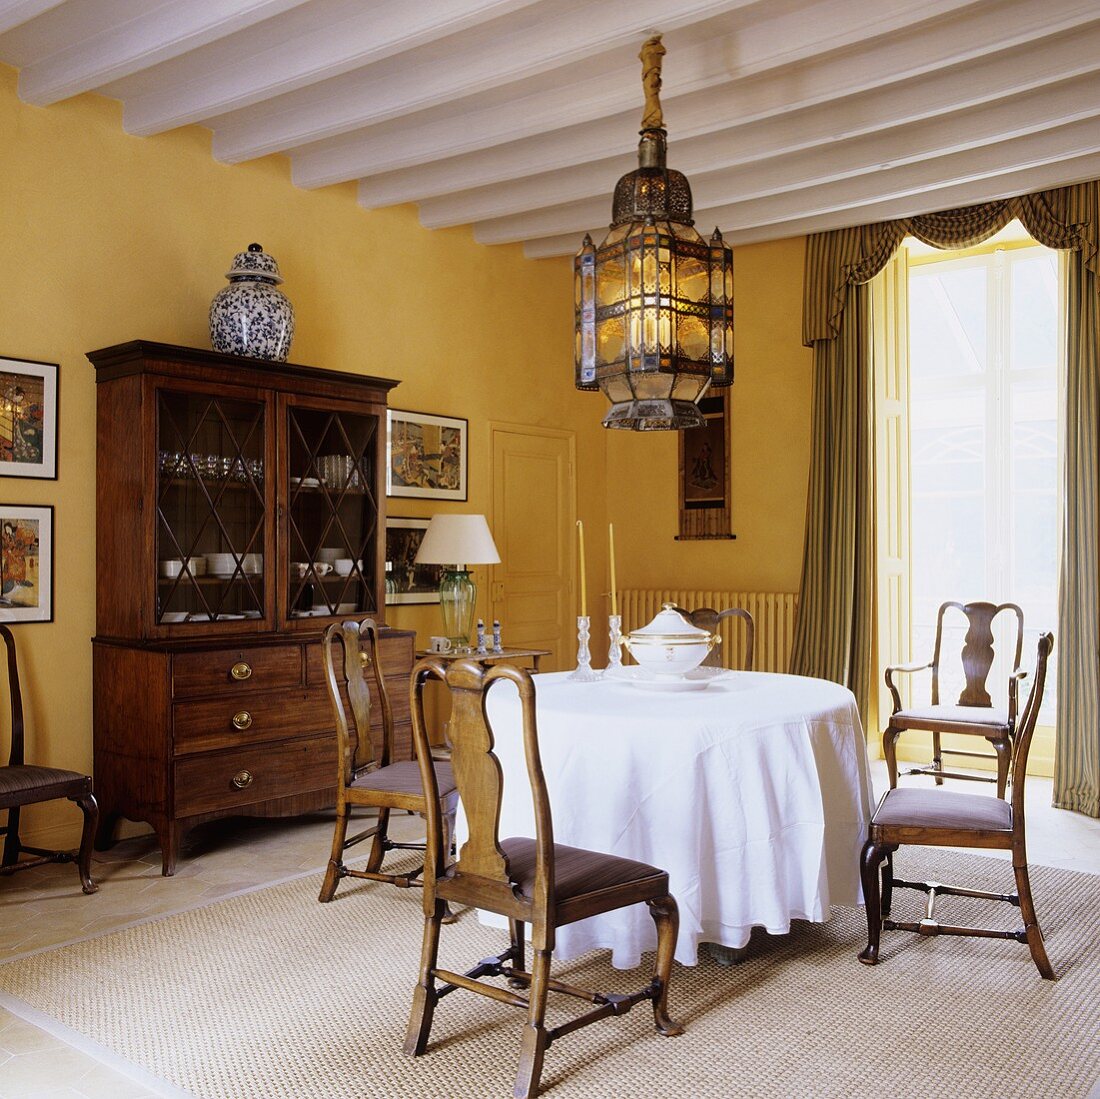 Antique country house furniture with an oriental ceiling lamp in a yellow-painted dining room